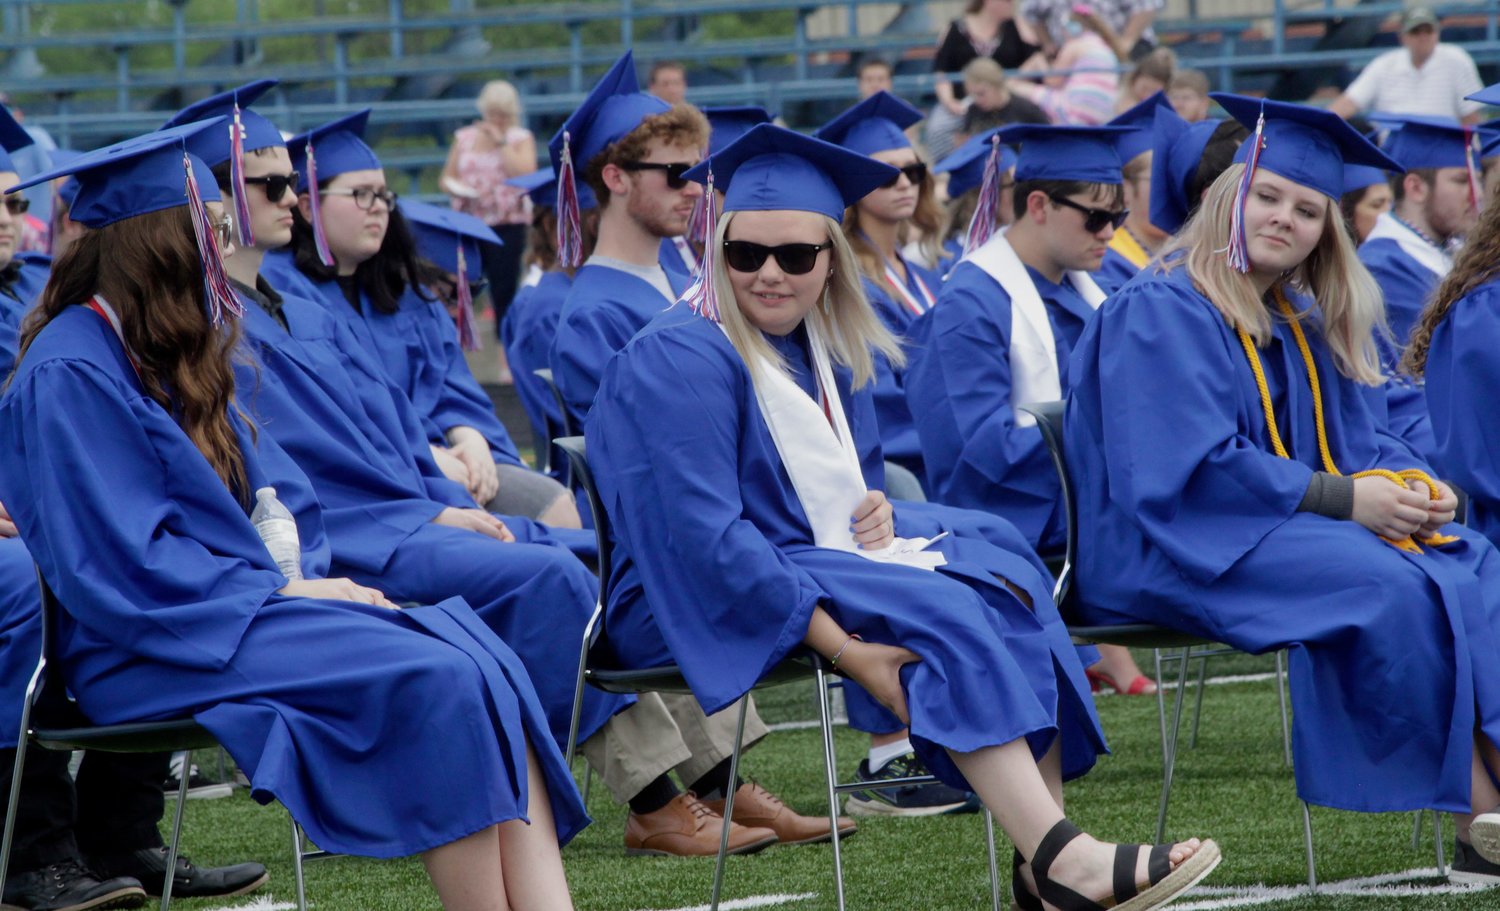 A scene from the Moberly H.S. 53rd Commencement for the Class of 2021 held May 23 at Dr. Larry K. Noel Spartan Stadium.